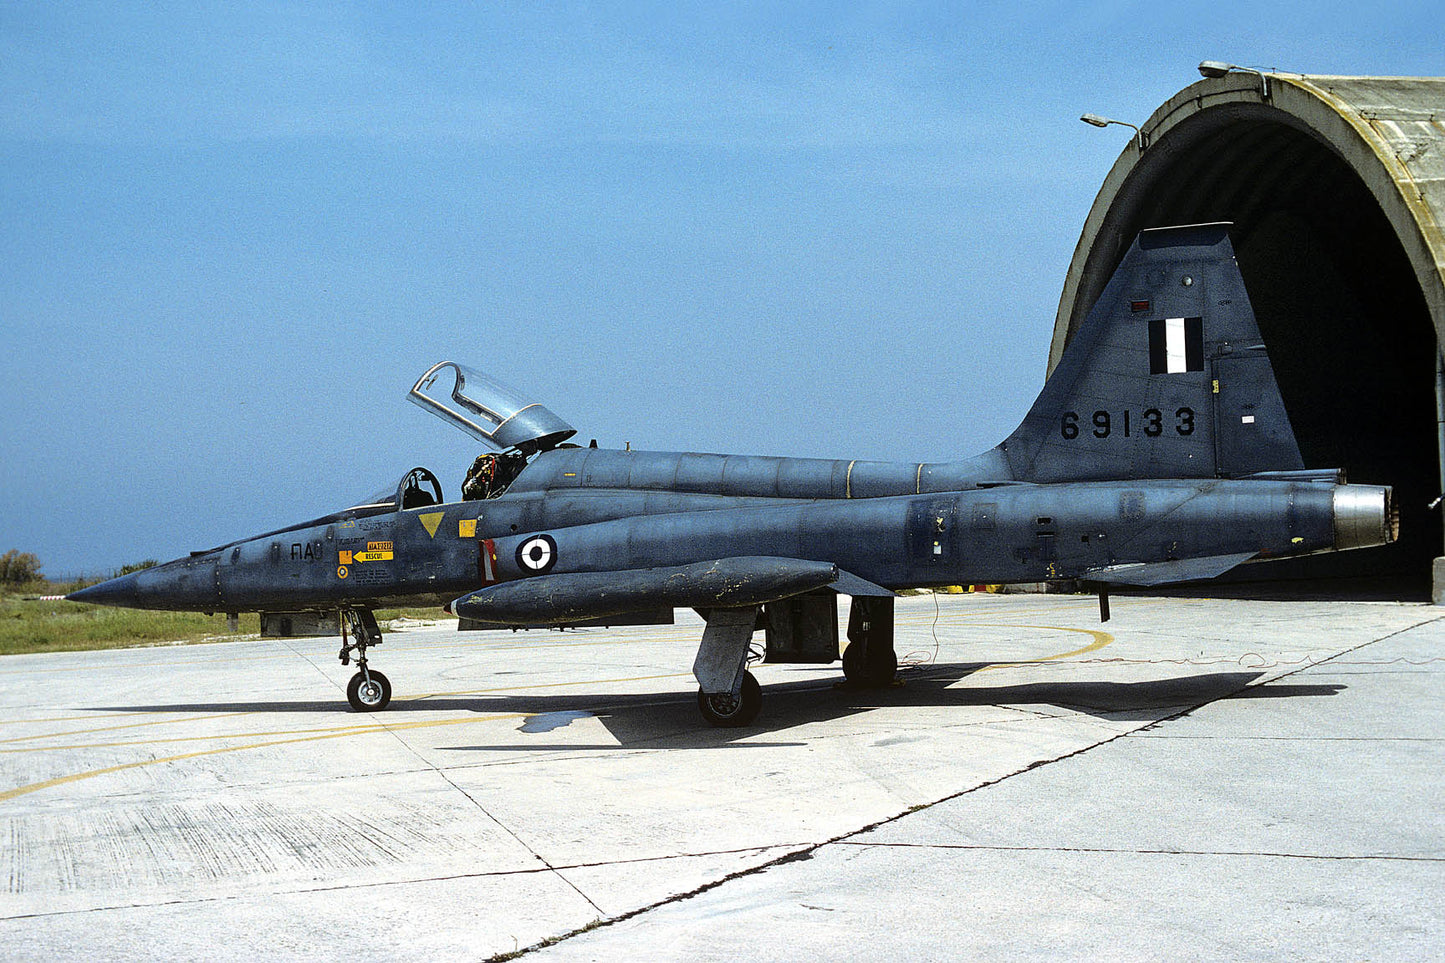 CSL06609 F-5A FREEDOM FIGHTER 69133